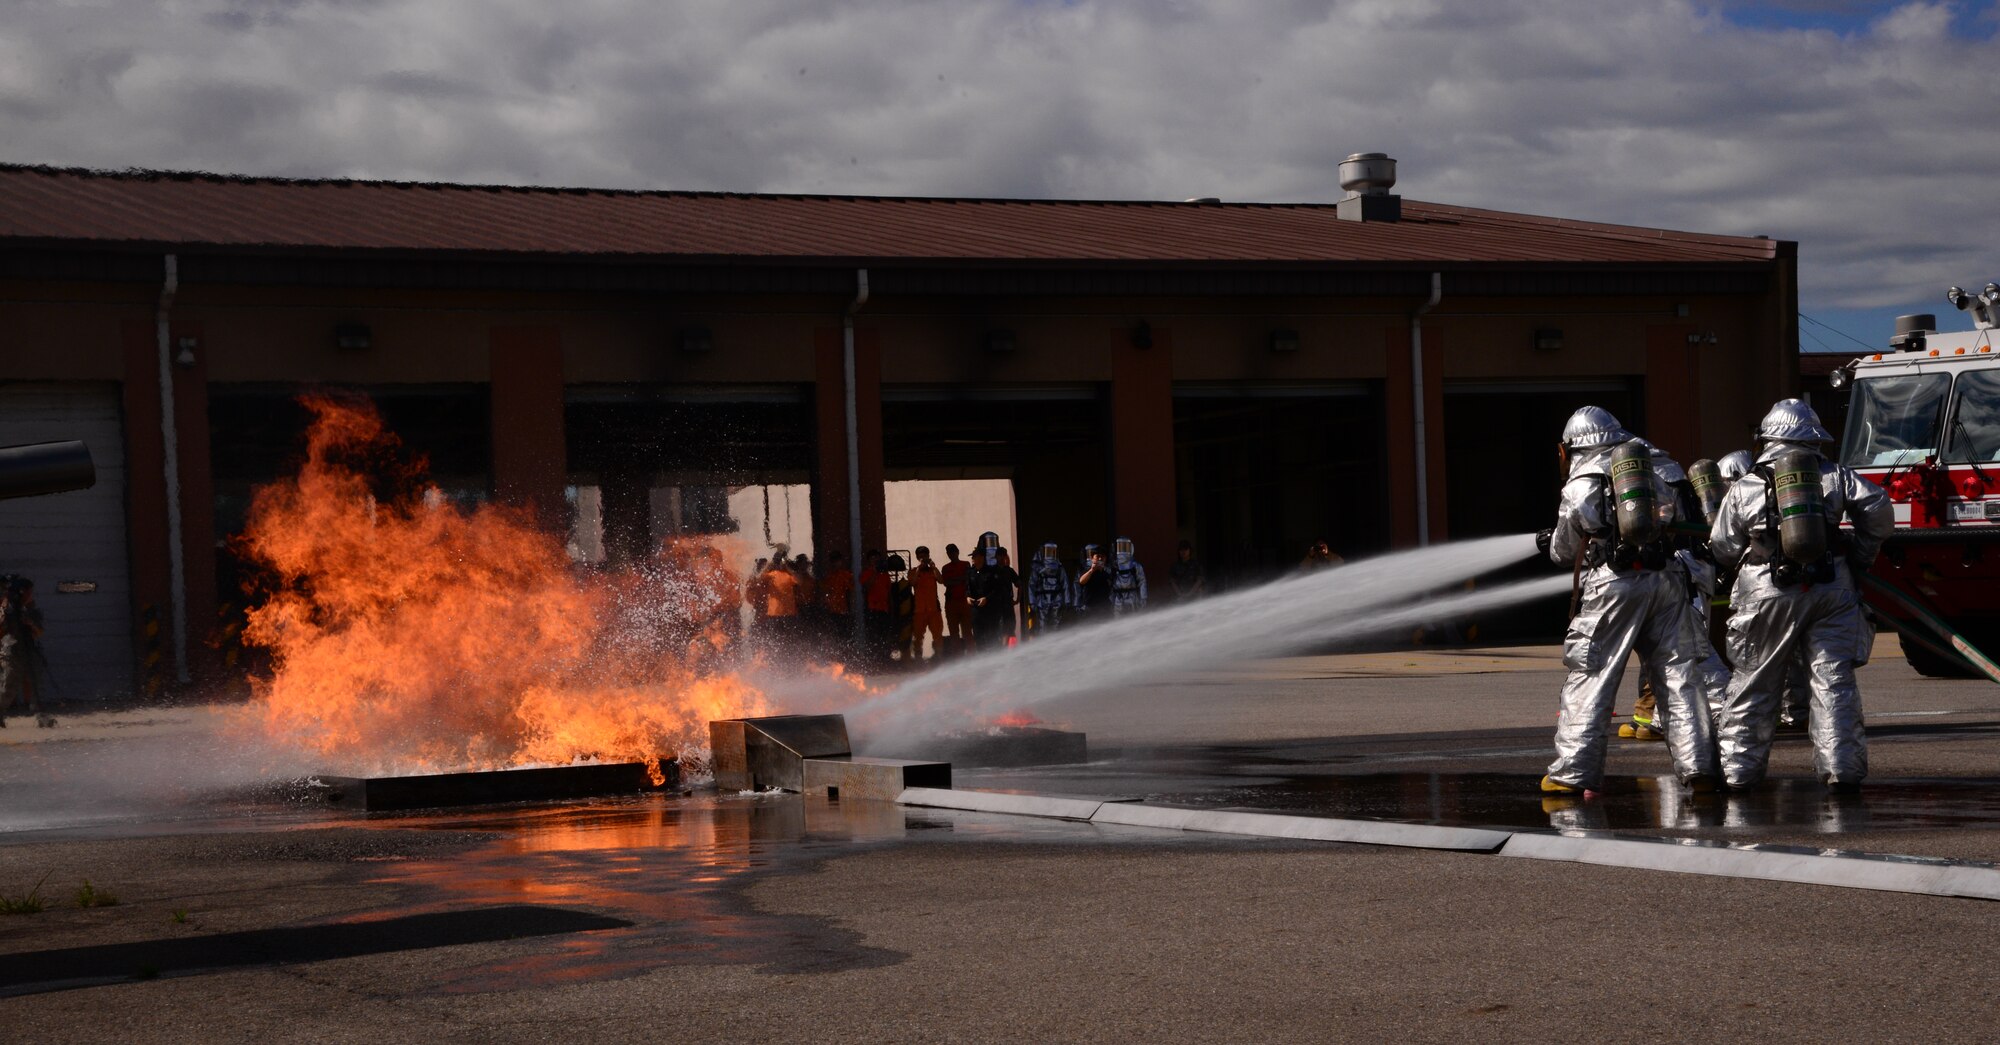 Firefighters from the Songtan fire station practice sweeping away and putting out a simulated fuel fire outside of a training aircraft Aug 26, 2015, at Osan Air Base, Republic of Korea. In the event of an aircraft emergency off-base, this training will assist local firefighters in safely containing and putting out any fire which could potentially occur. (U. S. Air Force photo by Staff Sgt. Benjamin Sutton) 